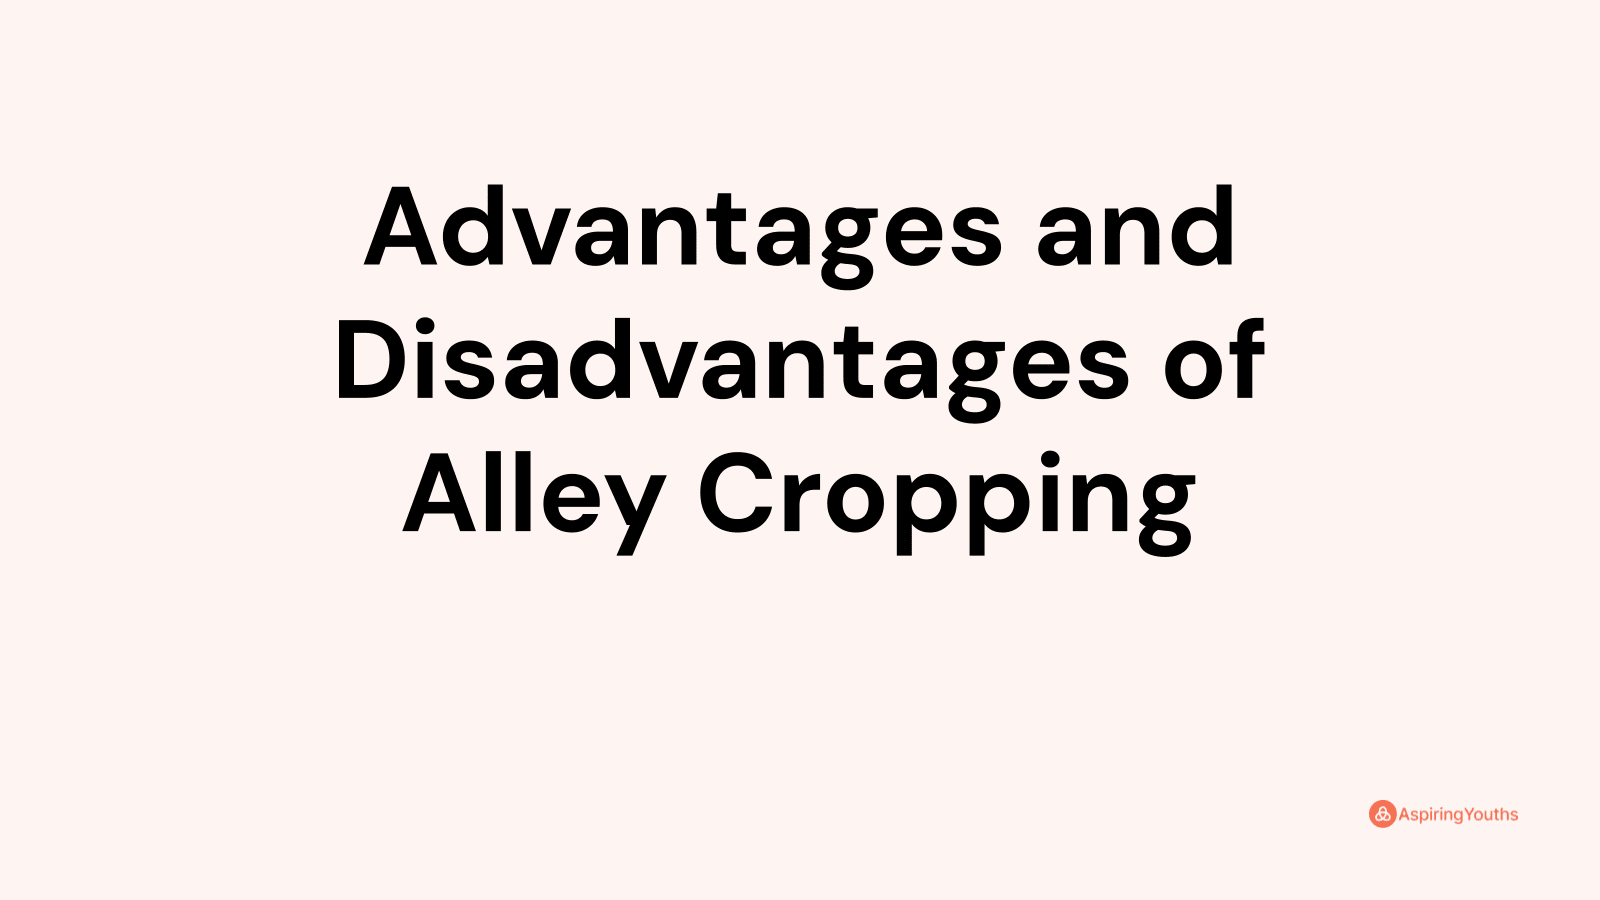 Advantages and disadvantages of Alley Cropping